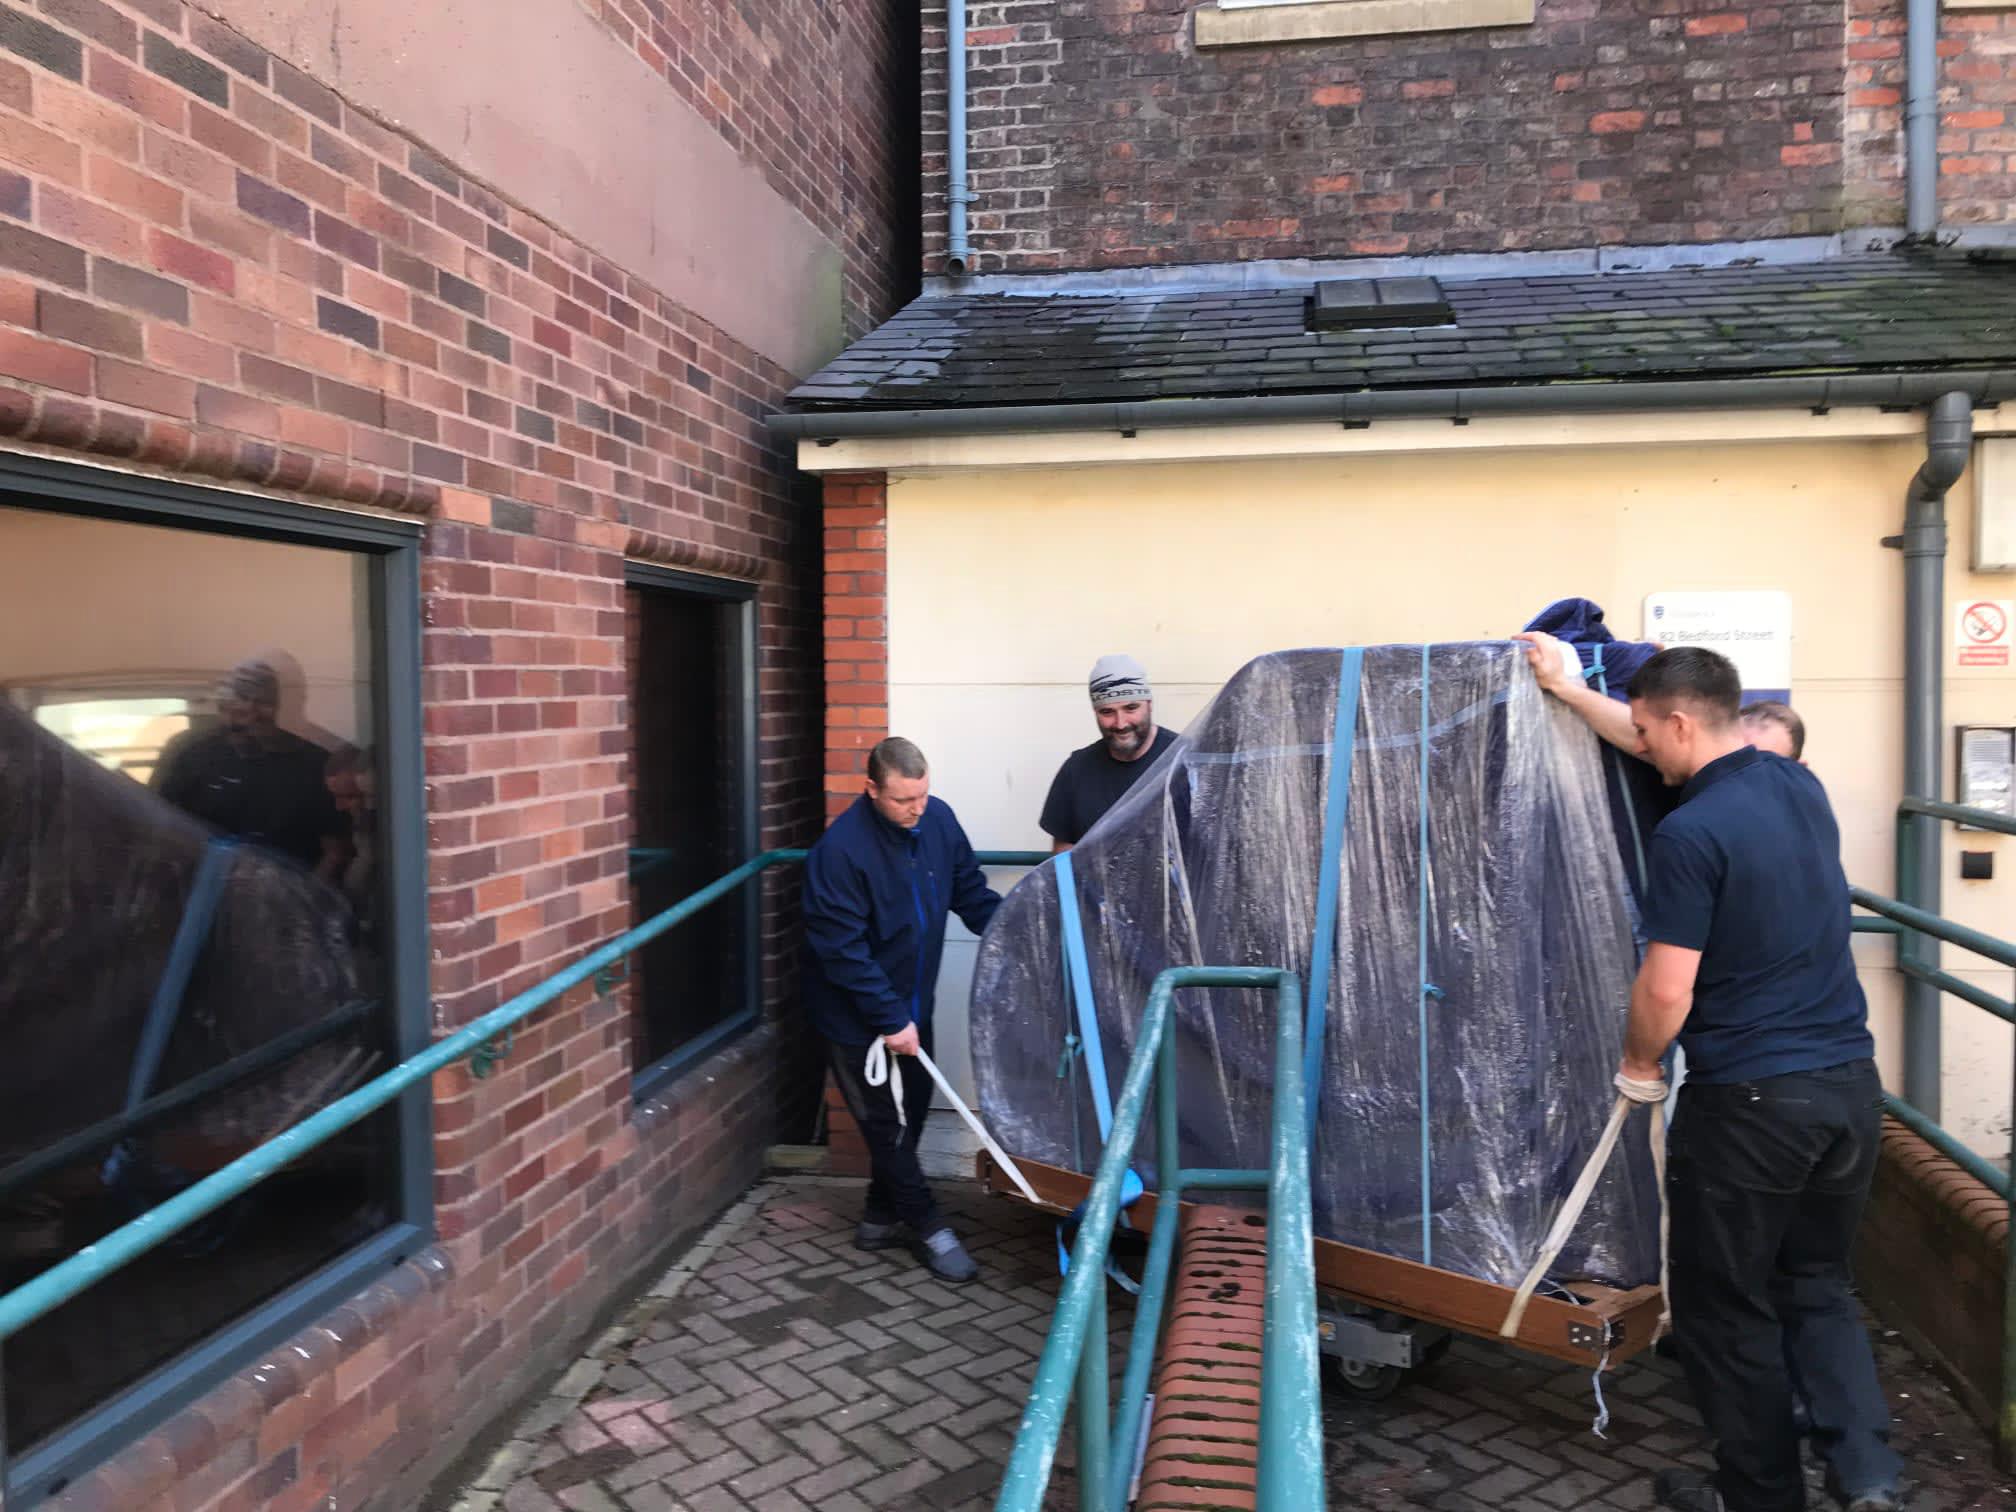 Images Merseyside Movers & Storers Ltd